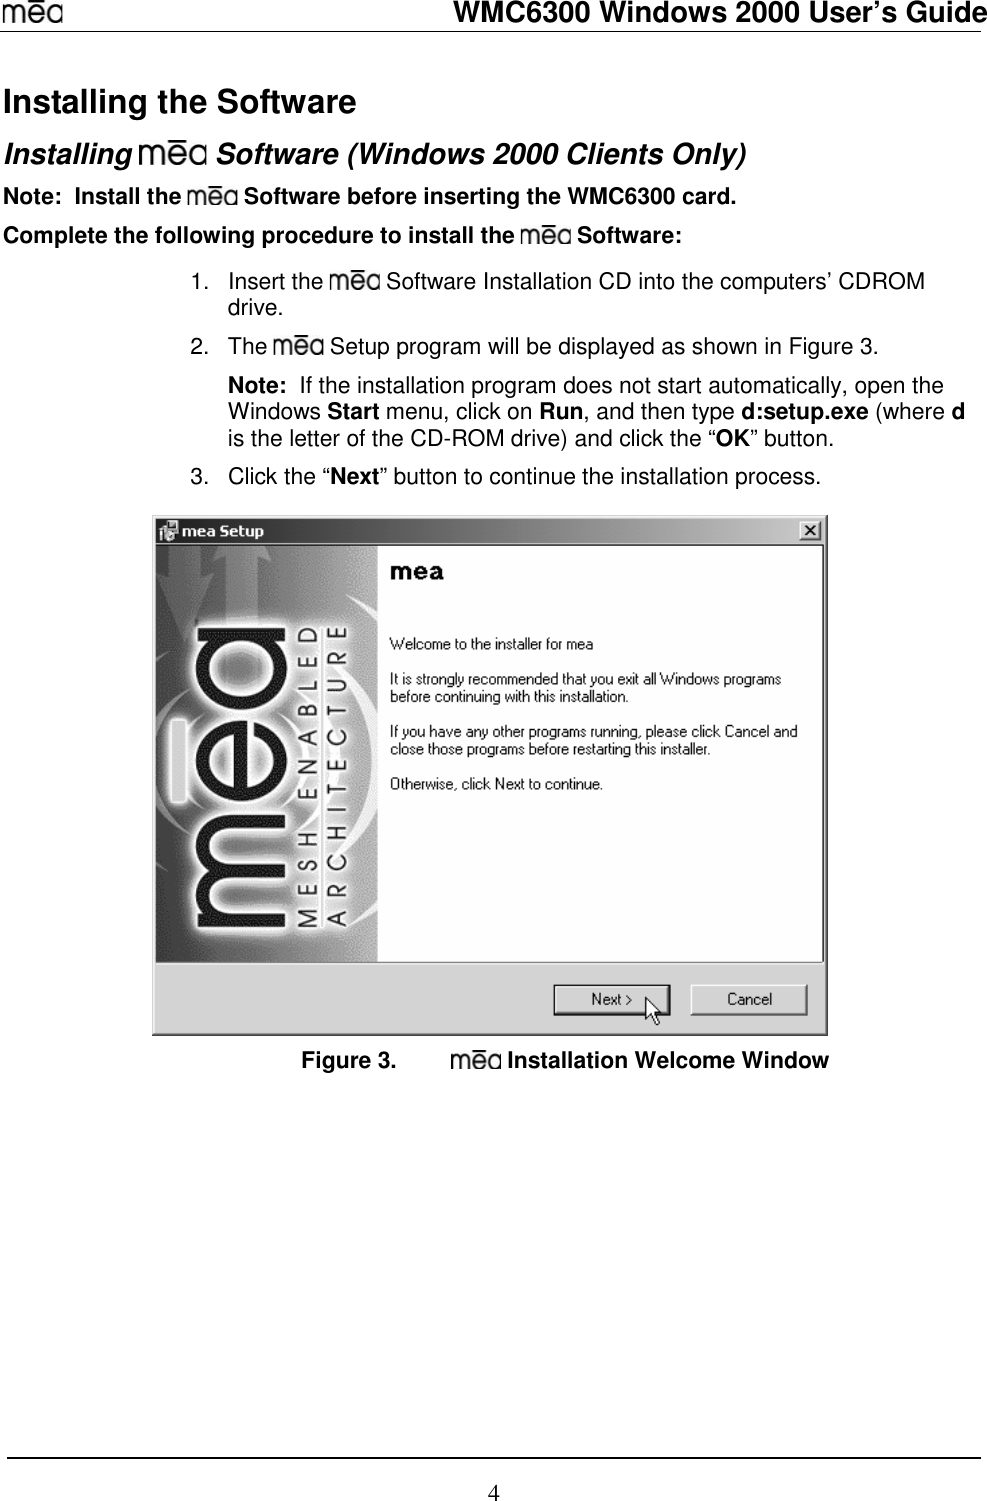   WMC6300 Windows 2000 User’s Guide 4 Installing the Software Installing   Software (Windows 2000 Clients Only) Note:  Install the   Software before inserting the WMC6300 card. Complete the following procedure to install the   Software:  1. Insert the   Software Installation CD into the computers’ CDROM drive. 2. The   Setup program will be displayed as shown in Figure 3.   Note:  If the installation program does not start automatically, open the Windows Start menu, click on Run, and then type d:setup.exe (where d is the letter of the CD-ROM drive) and click the “OK” button. 3.  Click the “Next” button to continue the installation process.  Figure 3.   Installation Welcome Window 